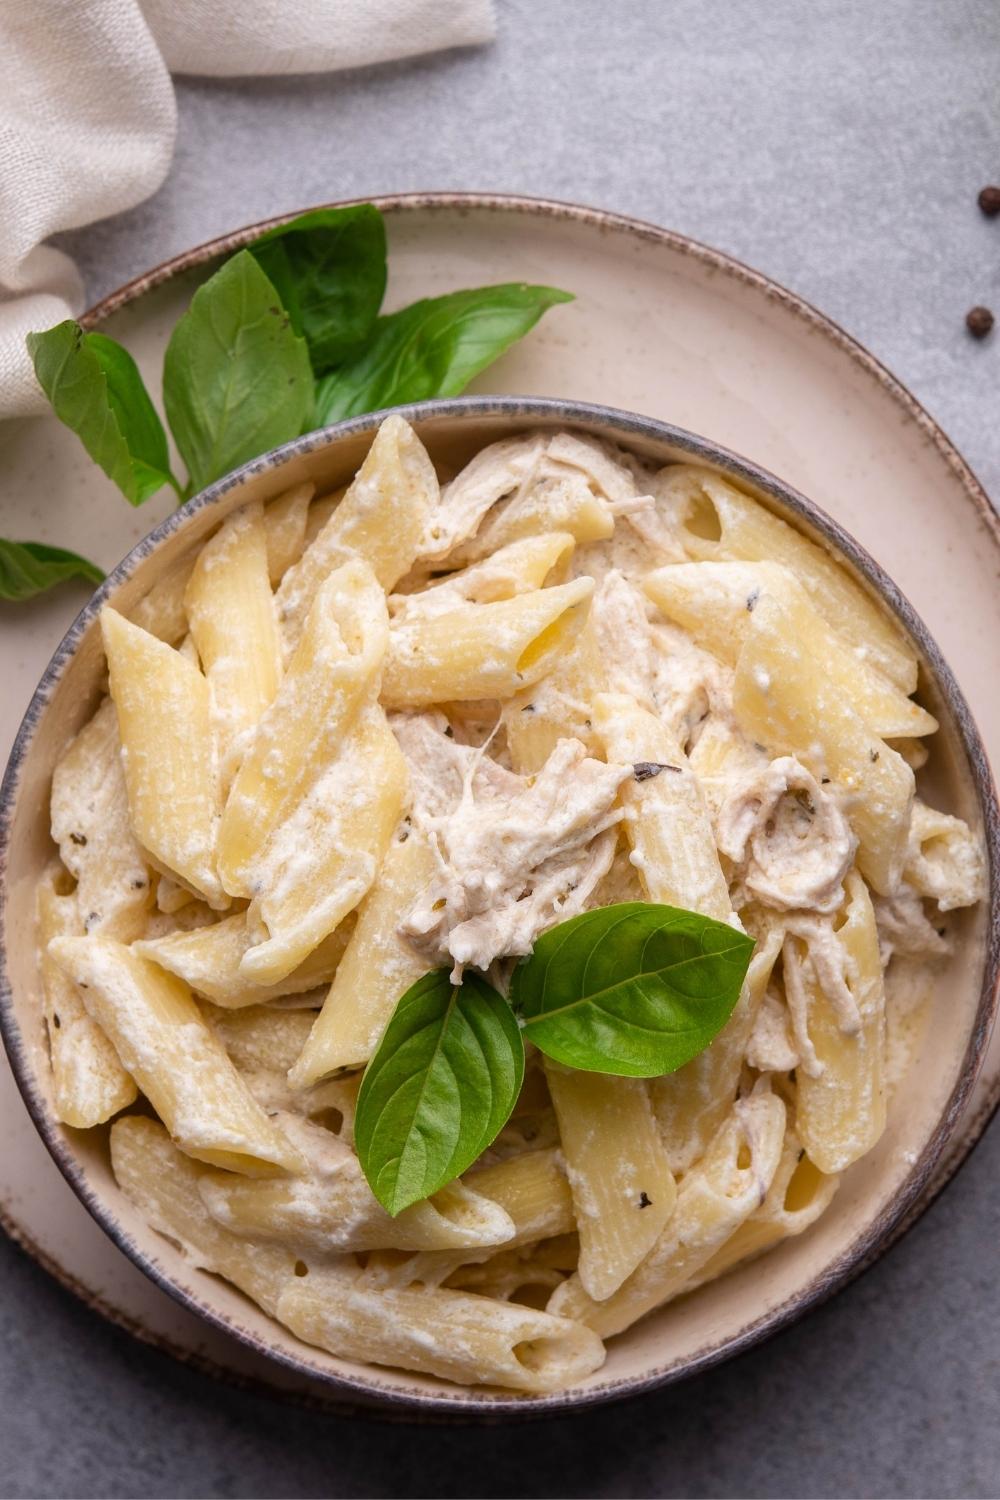 Shredded chicken on top of penne pasta in a creamy sauce in a bowl on a plate.